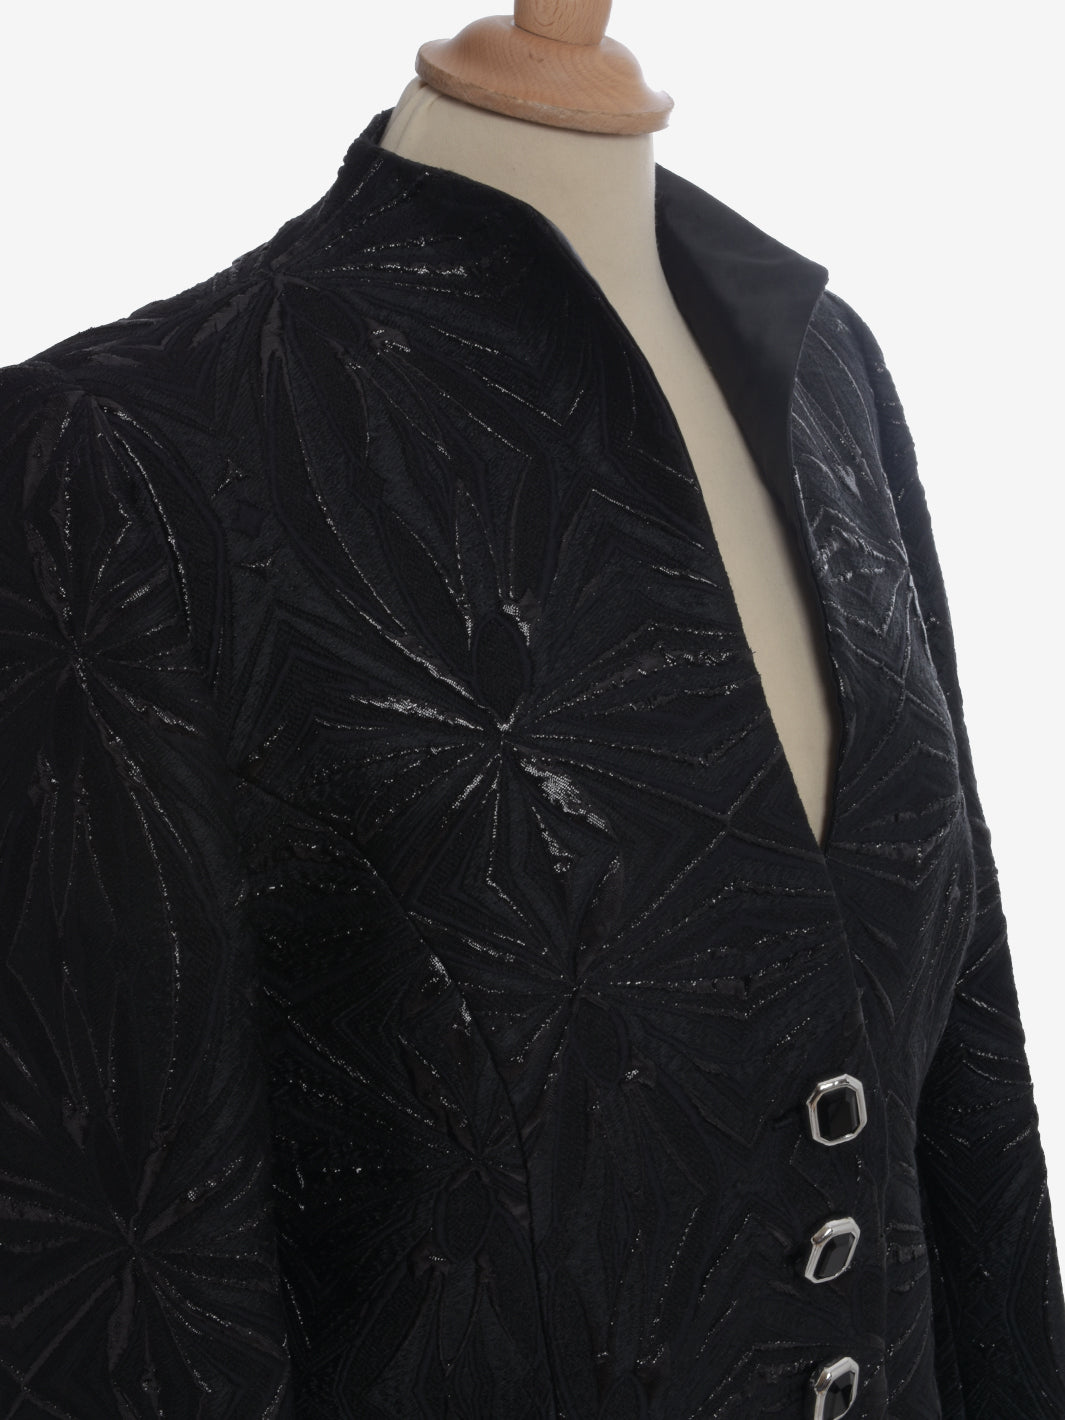 Vintage Black Blazer With Jewels Buttons